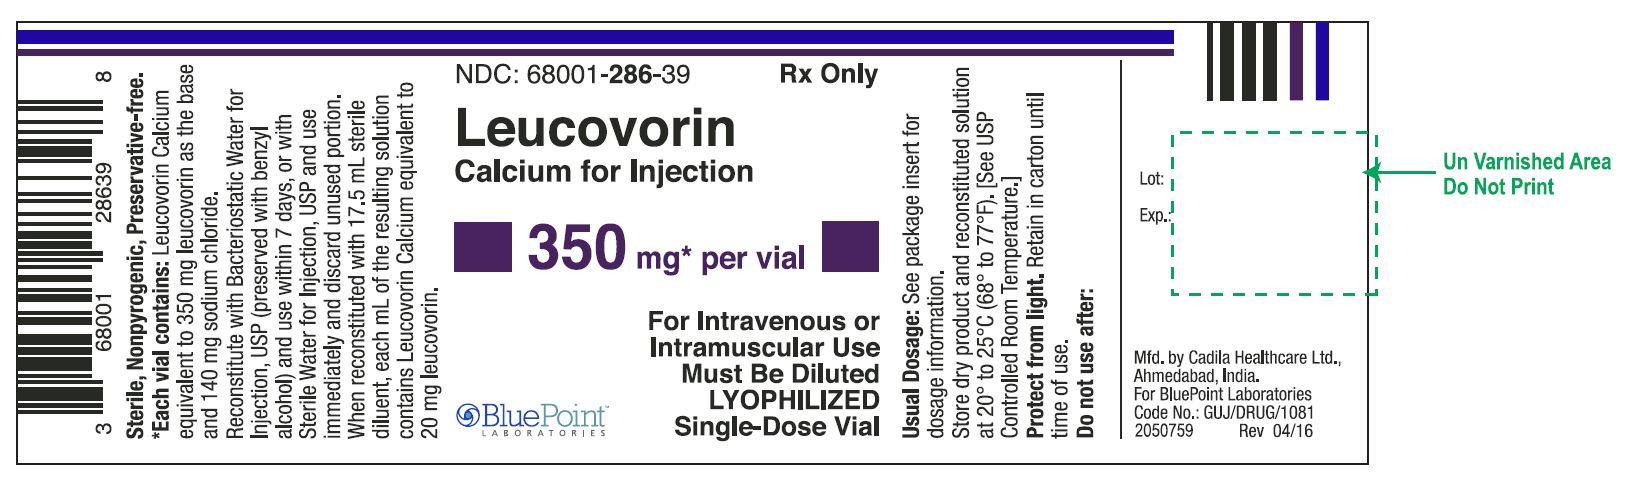 Leucovorin Calcium for Injection 350mg vial label